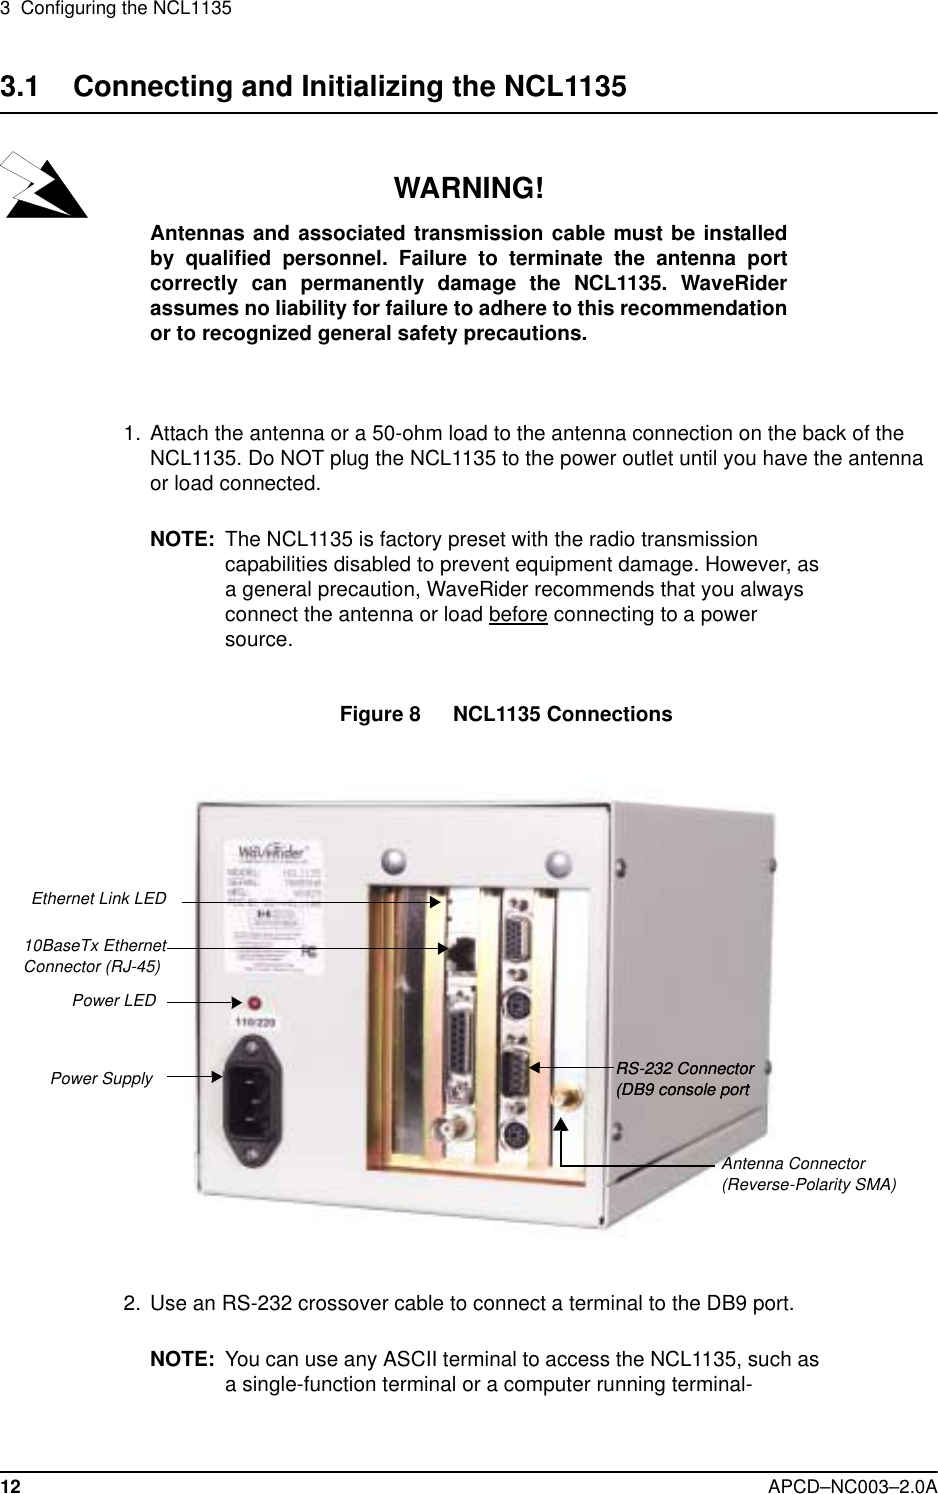 3  Configuring the NCL113512 APCD–NC003–2.0A3.1    Connecting and Initializing the NCL1135WARNING!Antennas and associated transmission cable must be installedby qualified personnel. Failure to terminate the antenna portcorrectly can permanently damage the NCL1135. WaveRiderassumes no liability for failure to adhere to this recommendationor to recognized general safety precautions.  1.  Attach the antenna or a 50-ohm load to the antenna connection on the back of the NCL1135. Do NOT plug the NCL1135 to the power outlet until you have the antenna or load connected.NOTE: The NCL1135 is factory preset with the radio transmission capabilities disabled to prevent equipment damage. However, as a general precaution, WaveRider recommends that you always connect the antenna or load before connecting to a power source.Figure 8   NCL1135 Connections  2. Use an RS-232 crossover cable to connect a terminal to the DB9 port. NOTE: You can use any ASCII terminal to access the NCL1135, such as a single-function terminal or a computer running terminal-  Ethernet Link LED10BaseTx Ethernet Connector (RJ-45)Antenna Connector (Reverse-Polarity SMA)RS-232 Connector (DB9 console portRS-232 Connector (DB9 console portPower LEDPower Supply  